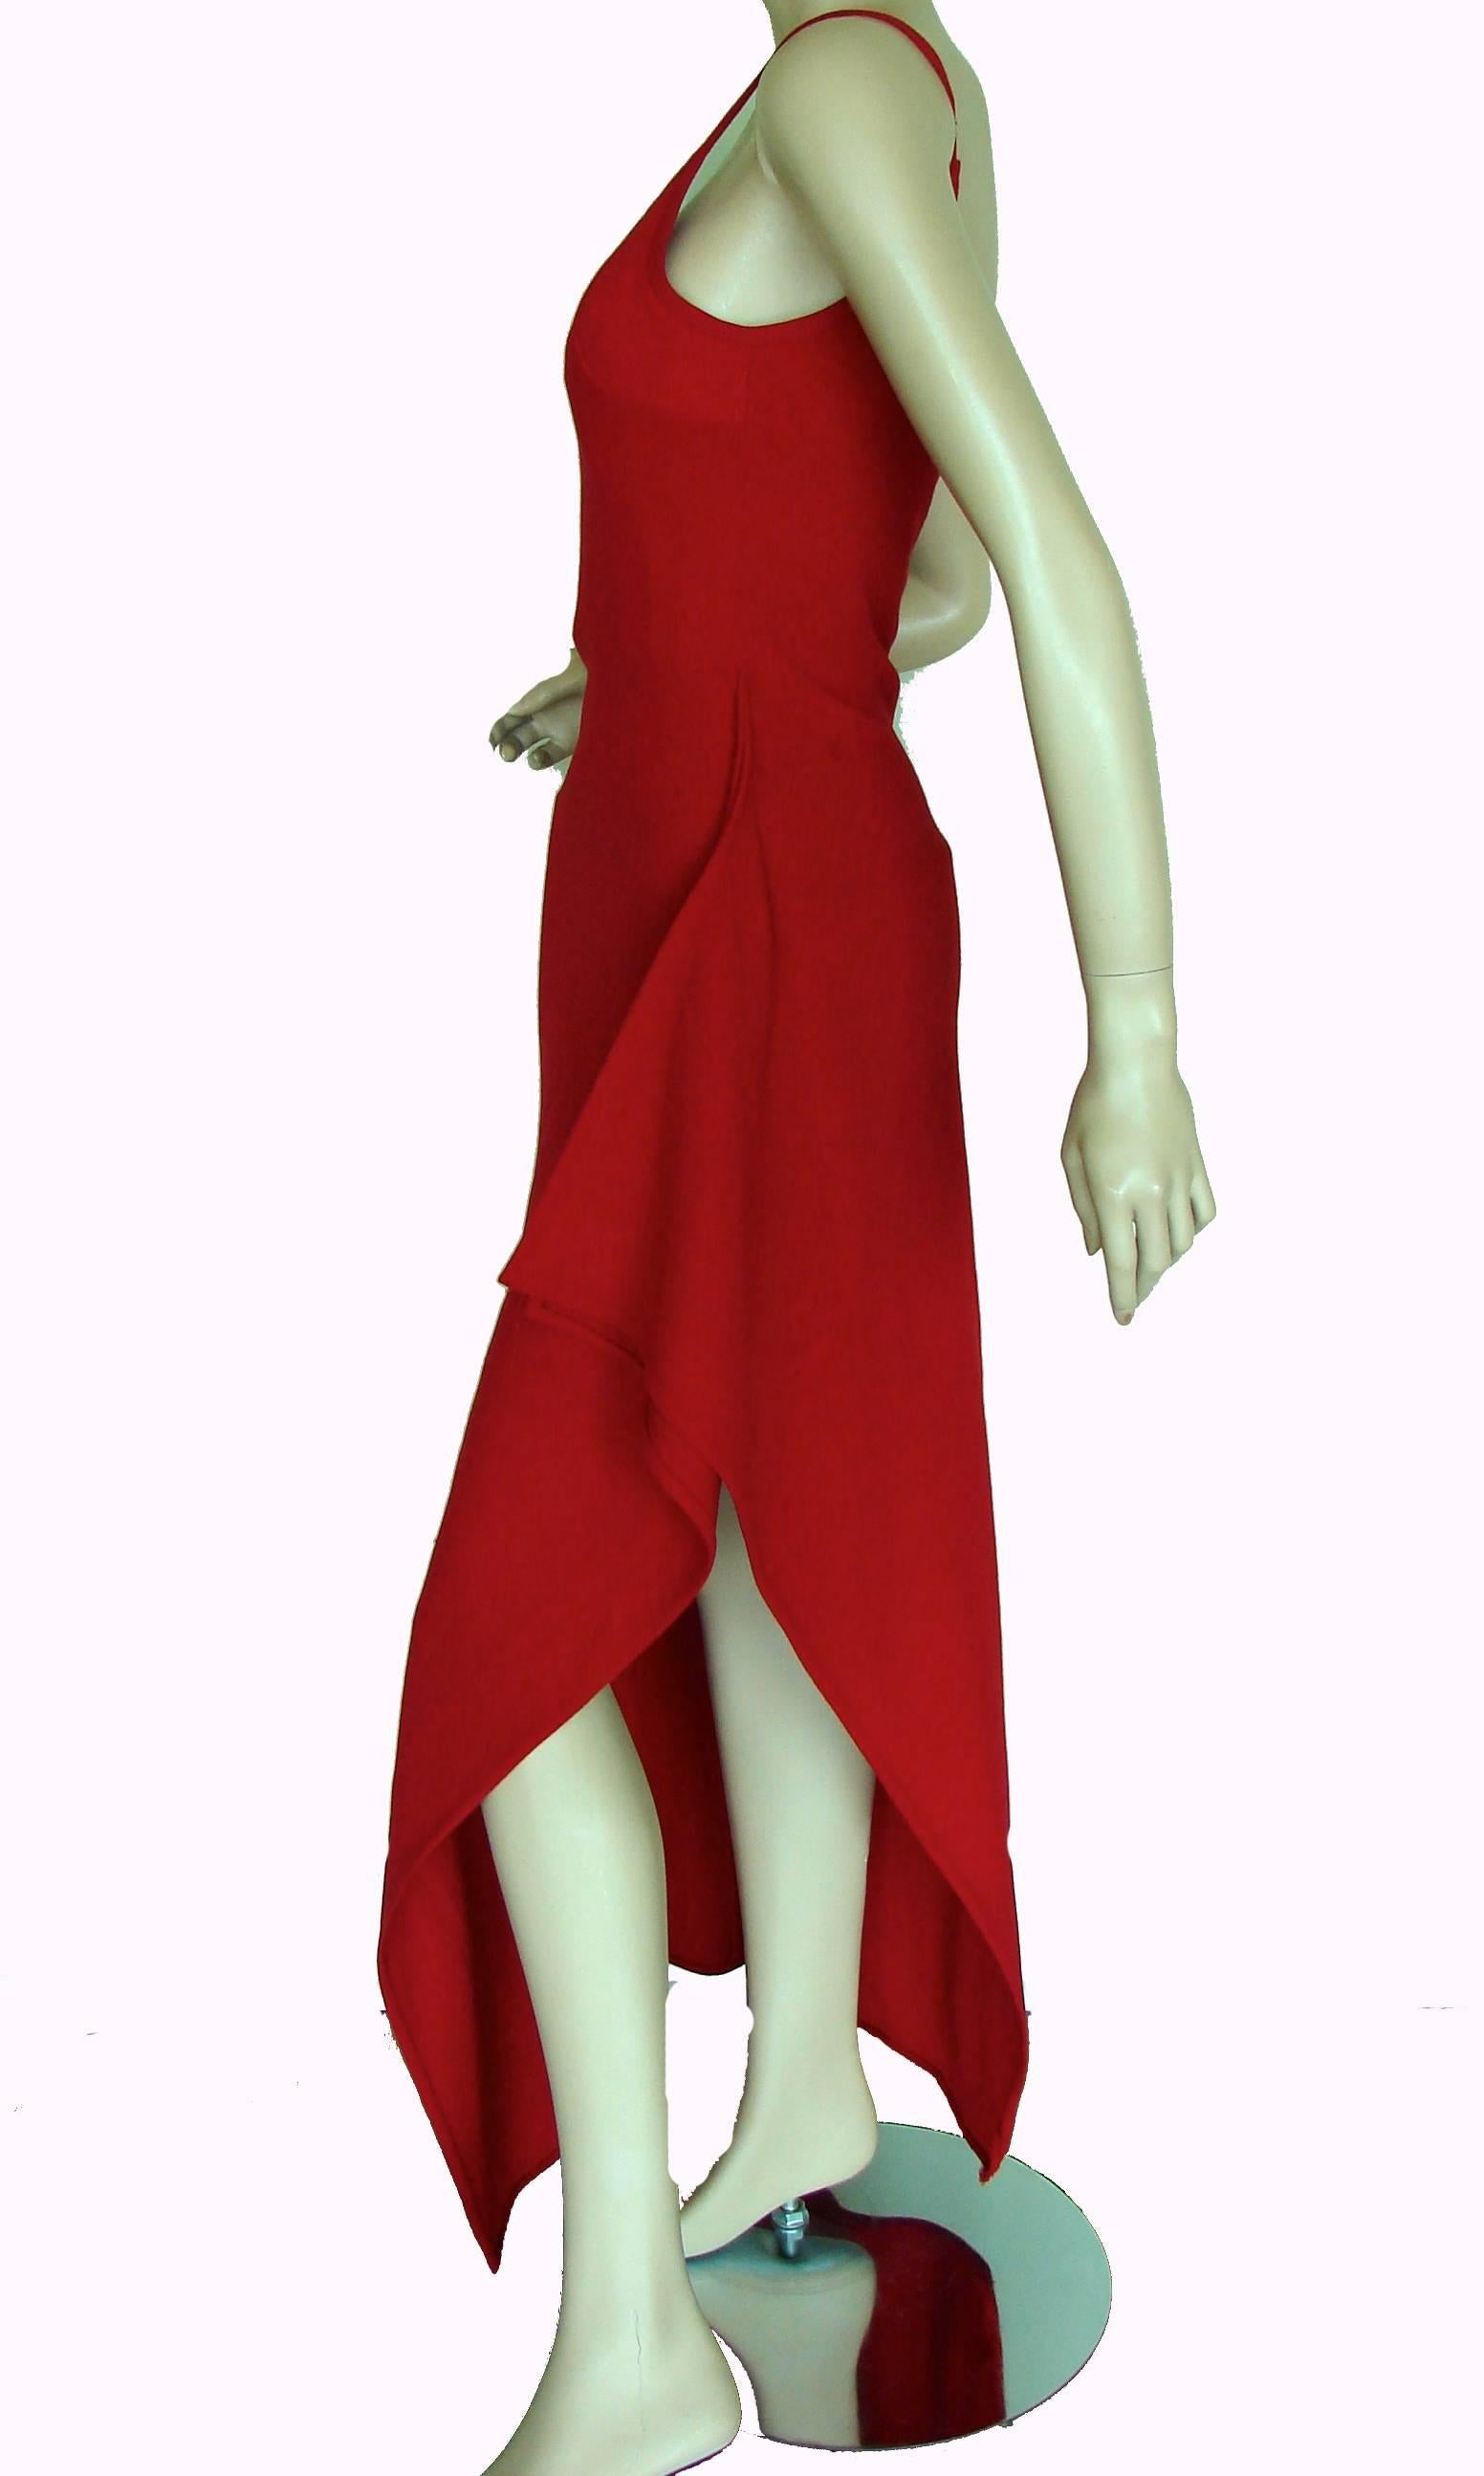 This vibrant dress is from Gianni Versace Couture, from the early 1990s.  It features a separately zippered silk-covered bustier section on the interior, giving the wearer just the right amount of sexy top boost (see photo 6).  The dress is unlined